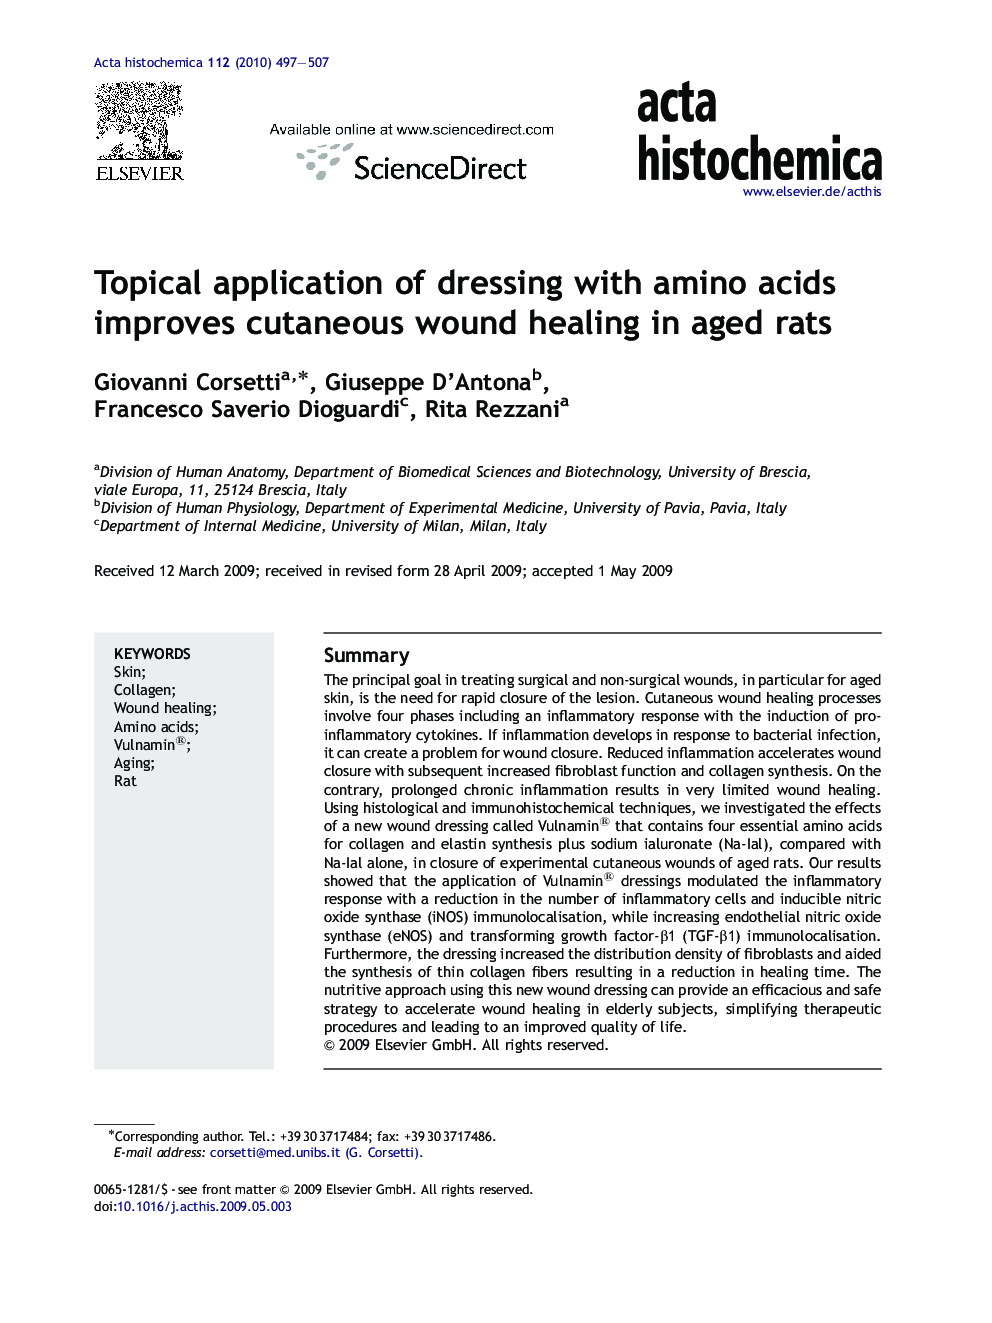 Topical application of dressing with amino acids improves cutaneous wound healing in aged rats